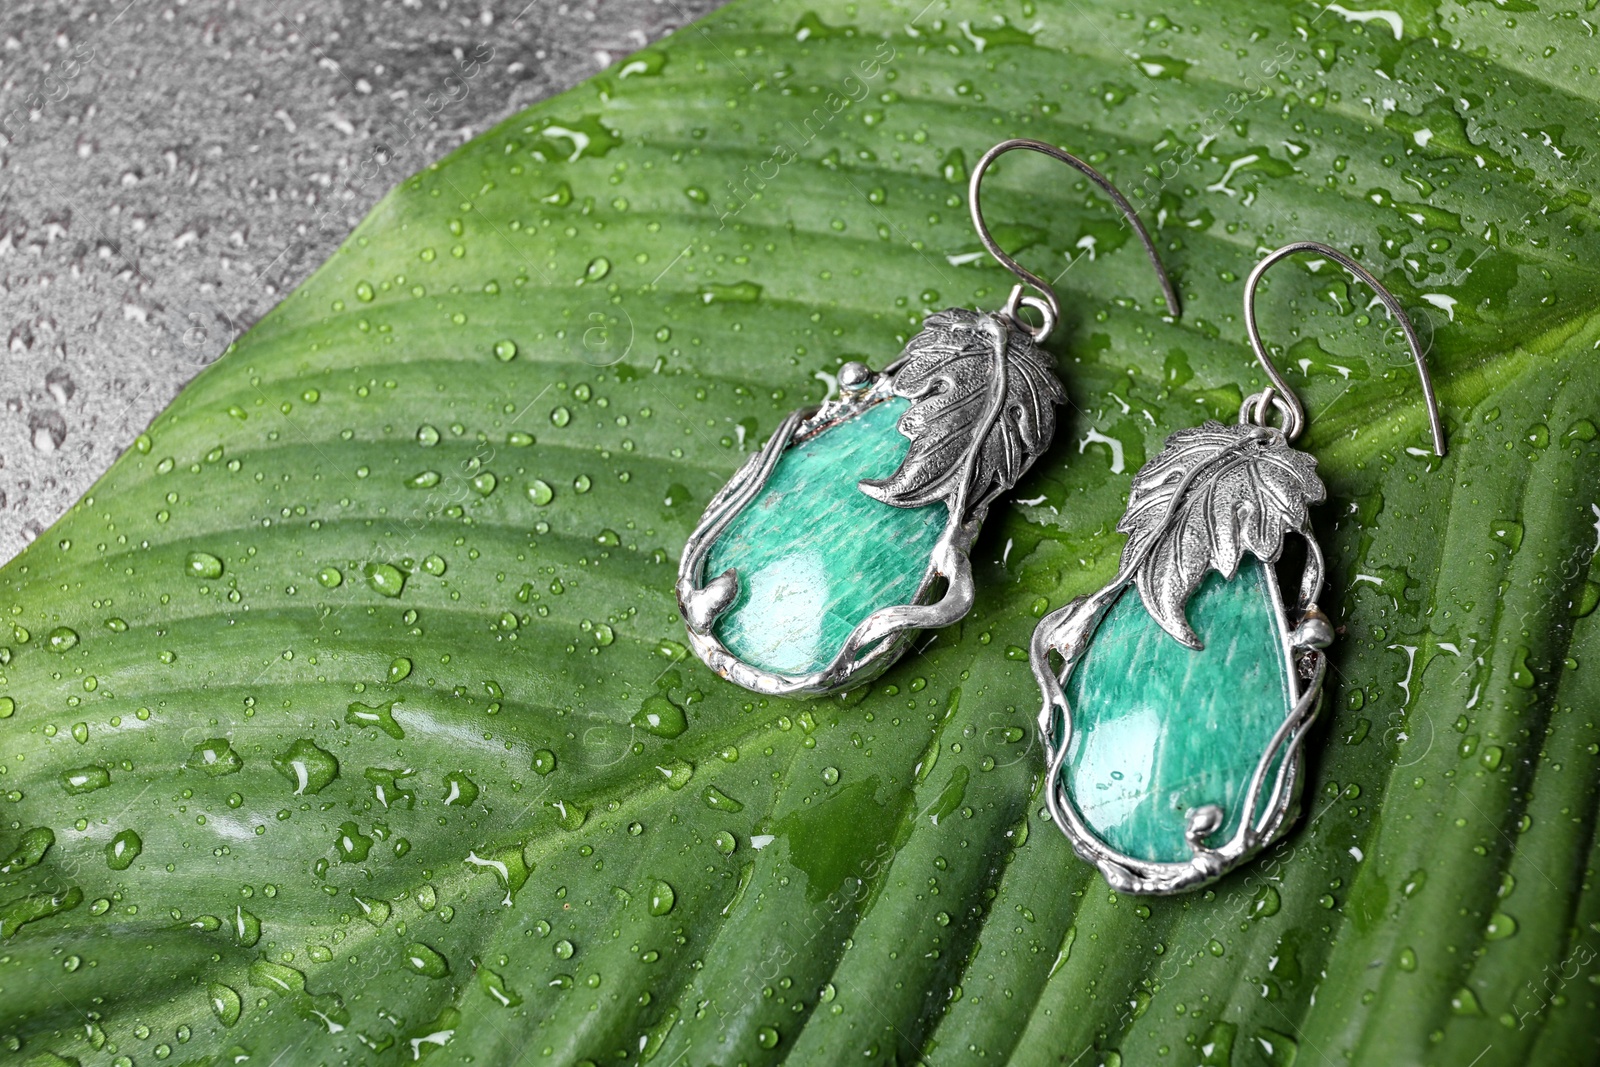 Photo of Beautiful pair of silver earrings with amazonite gemstones on green leaf, above view. Space for text